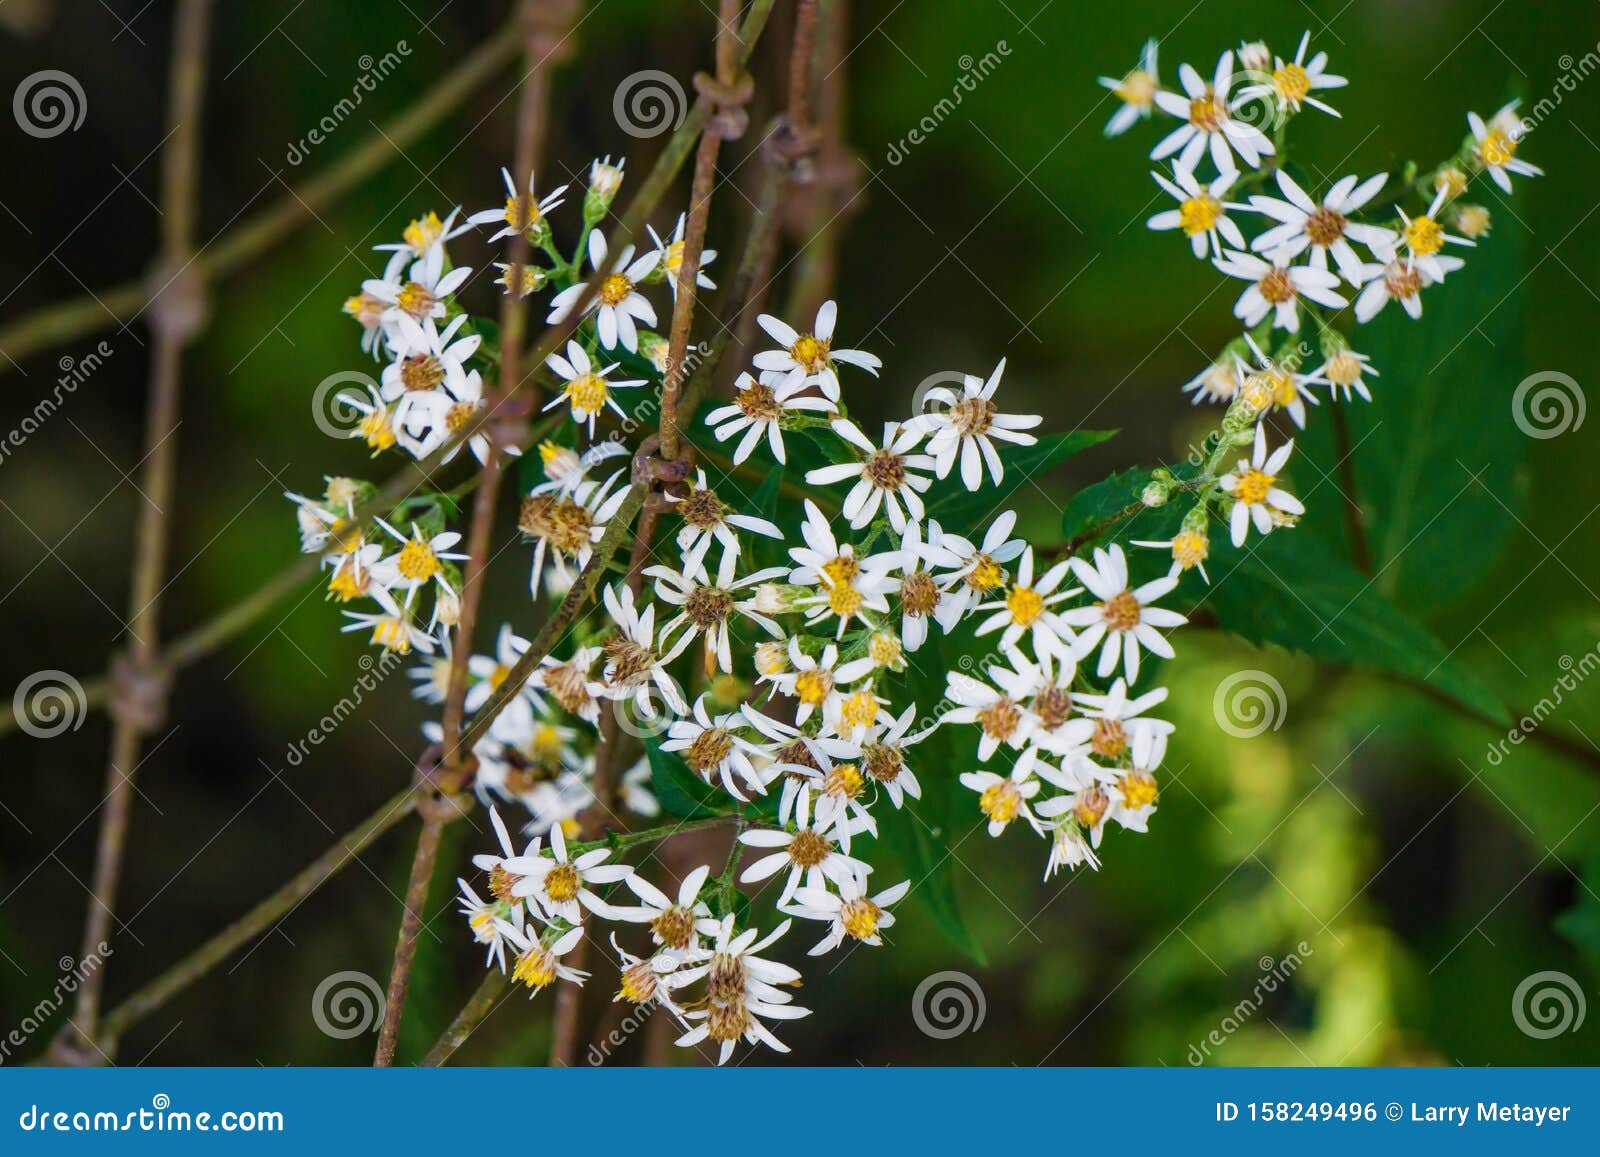 calico aster, aster lateriflorus